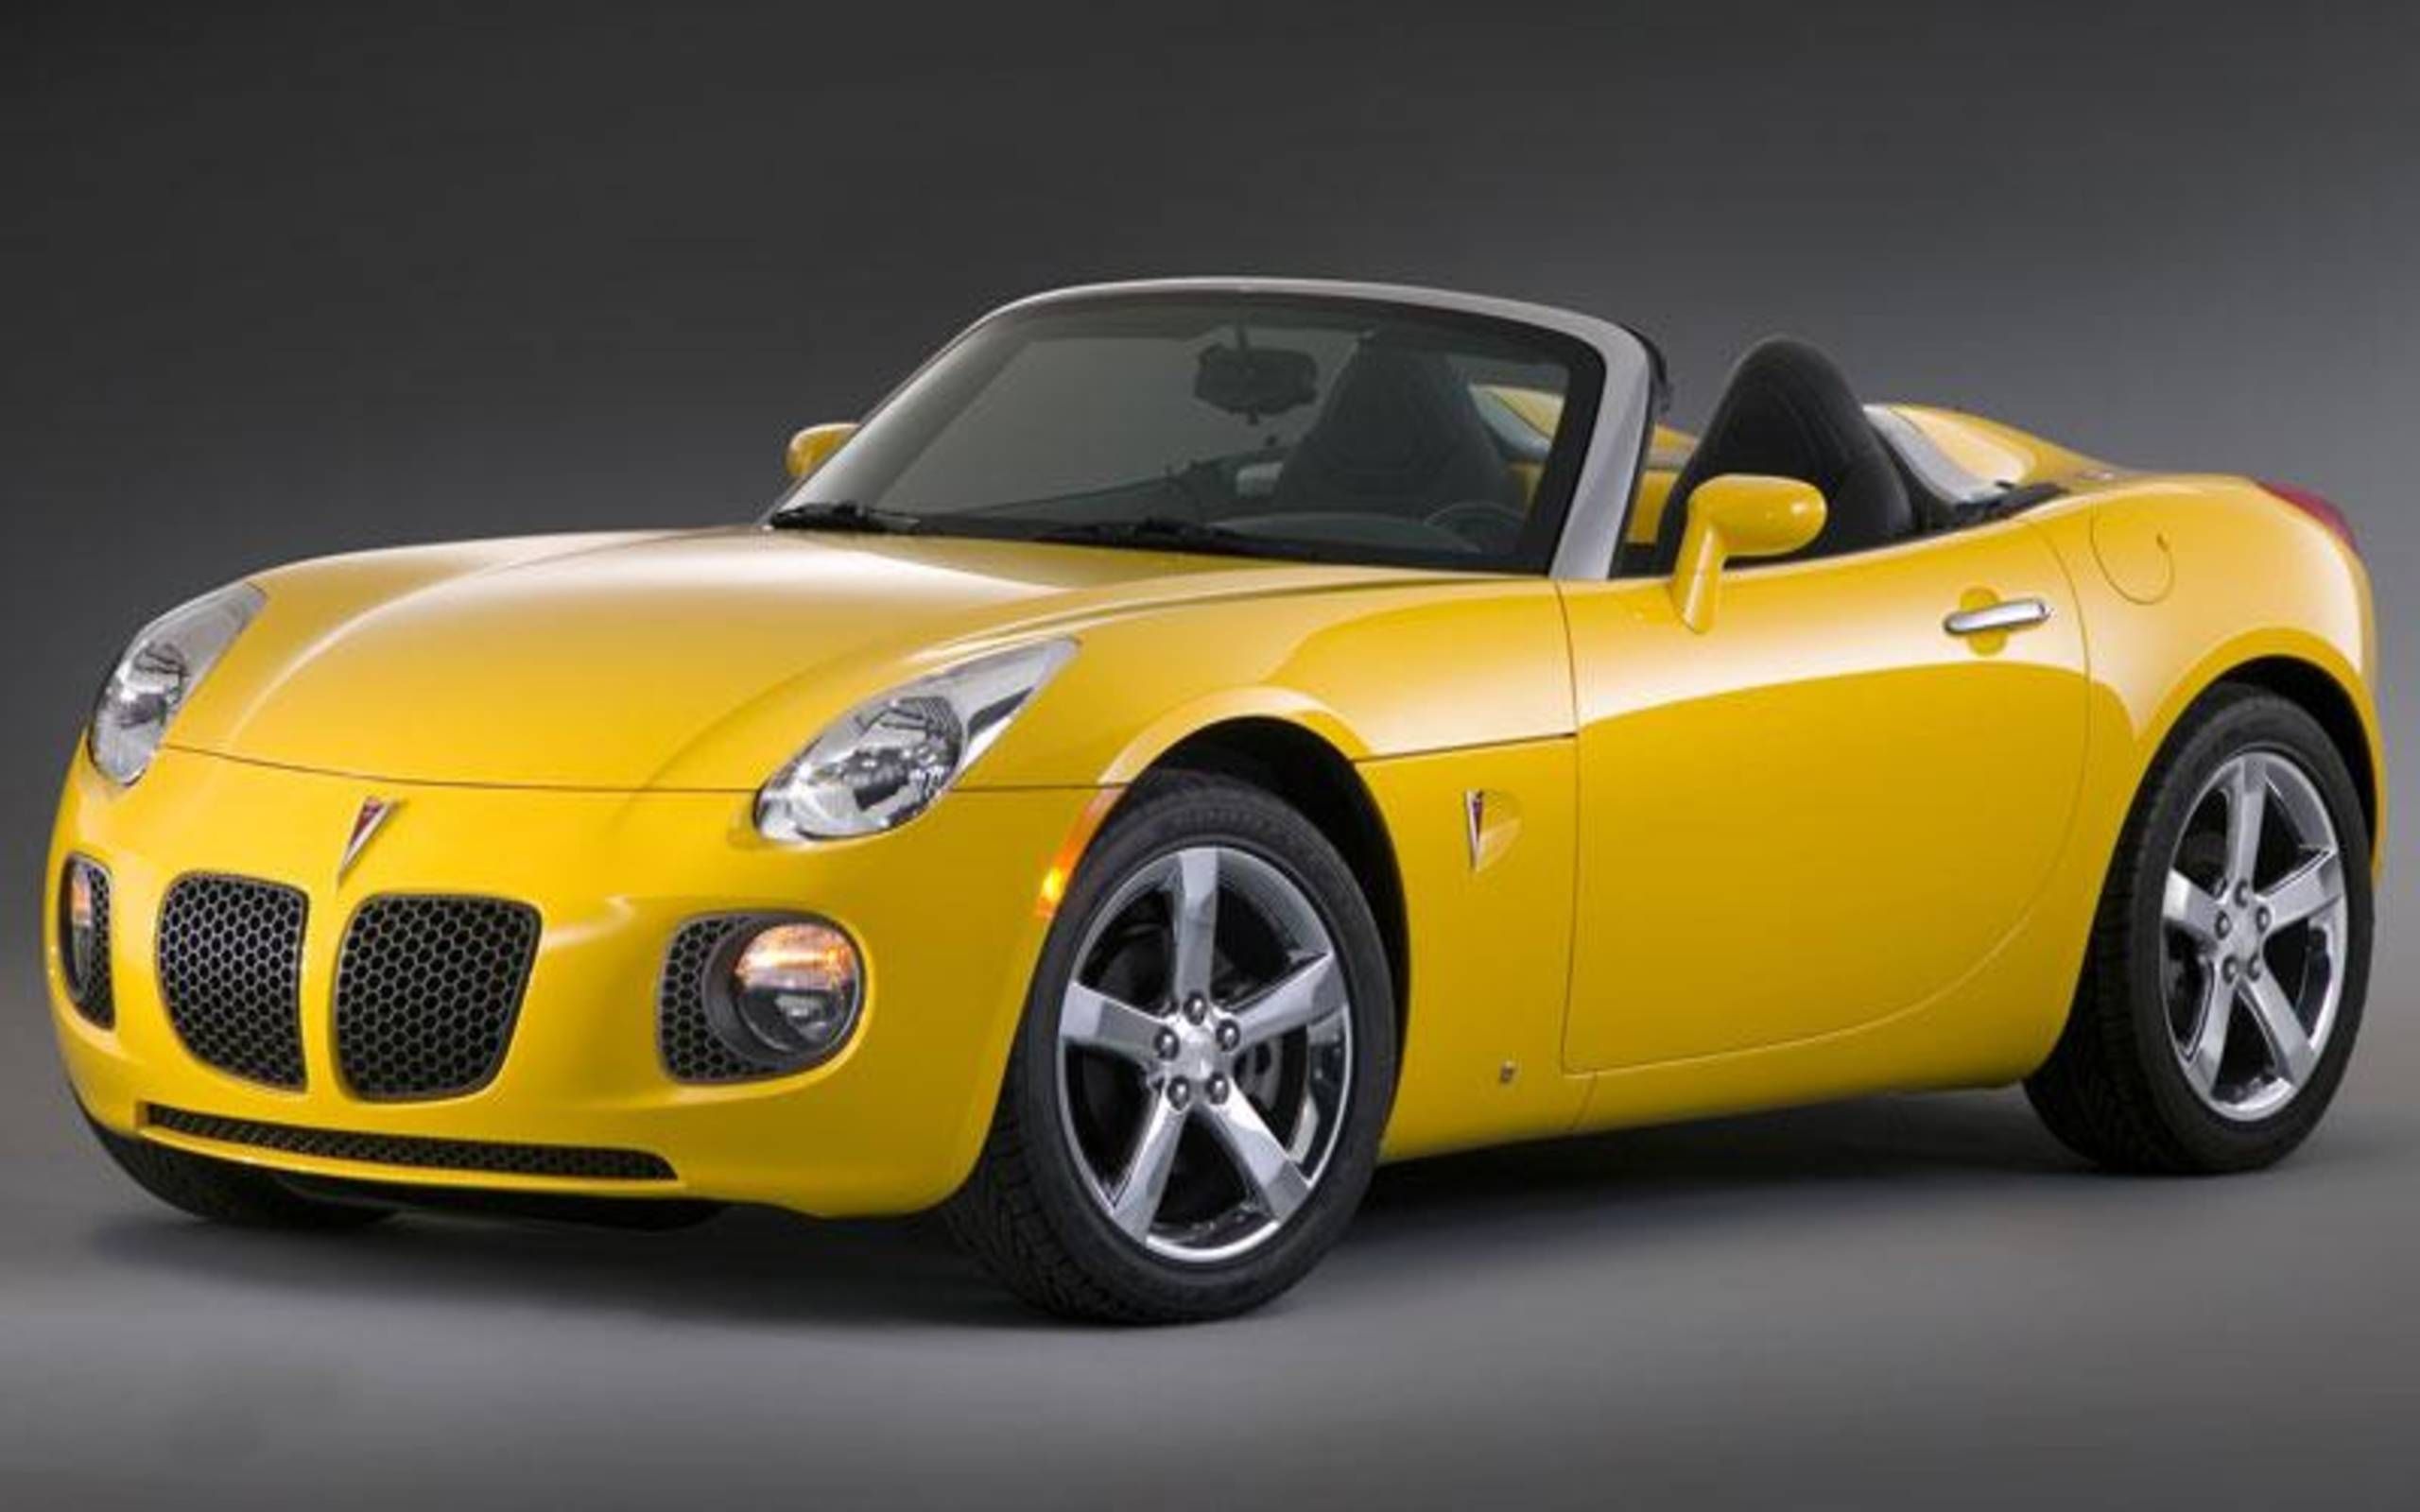 Germans leading direct injection charge; Solstice GXP to be first